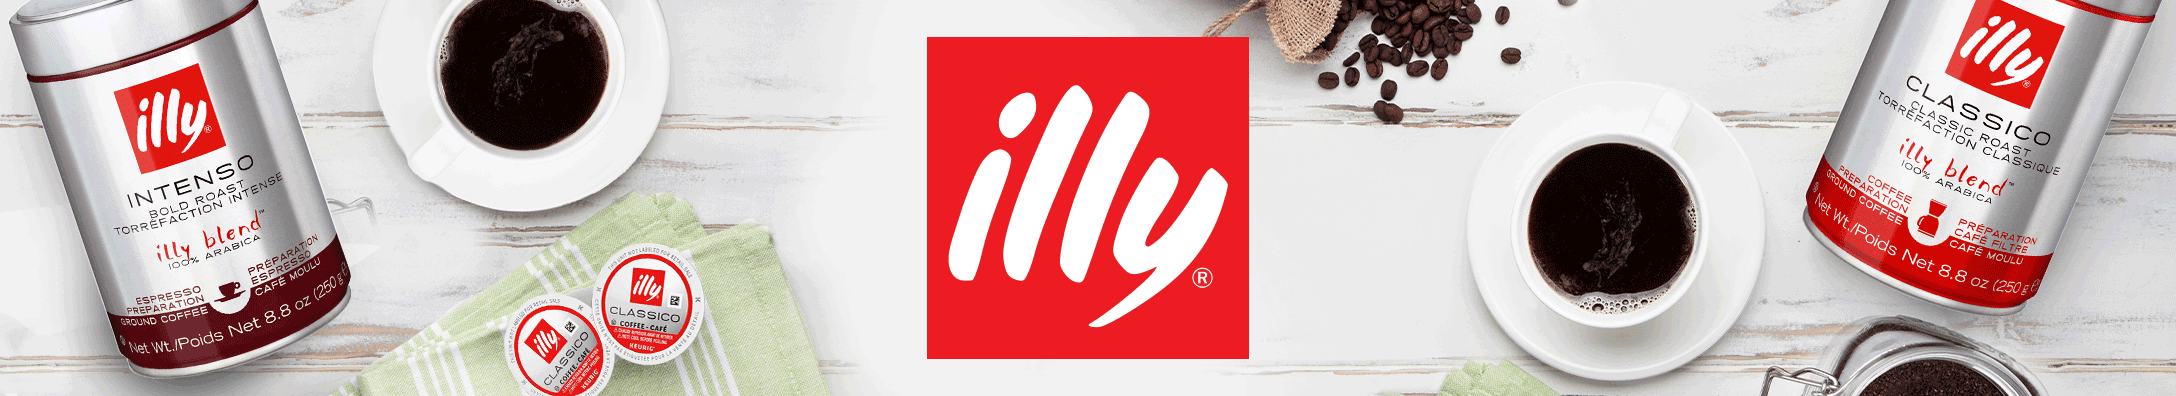 illy logo surrounded by coffee products